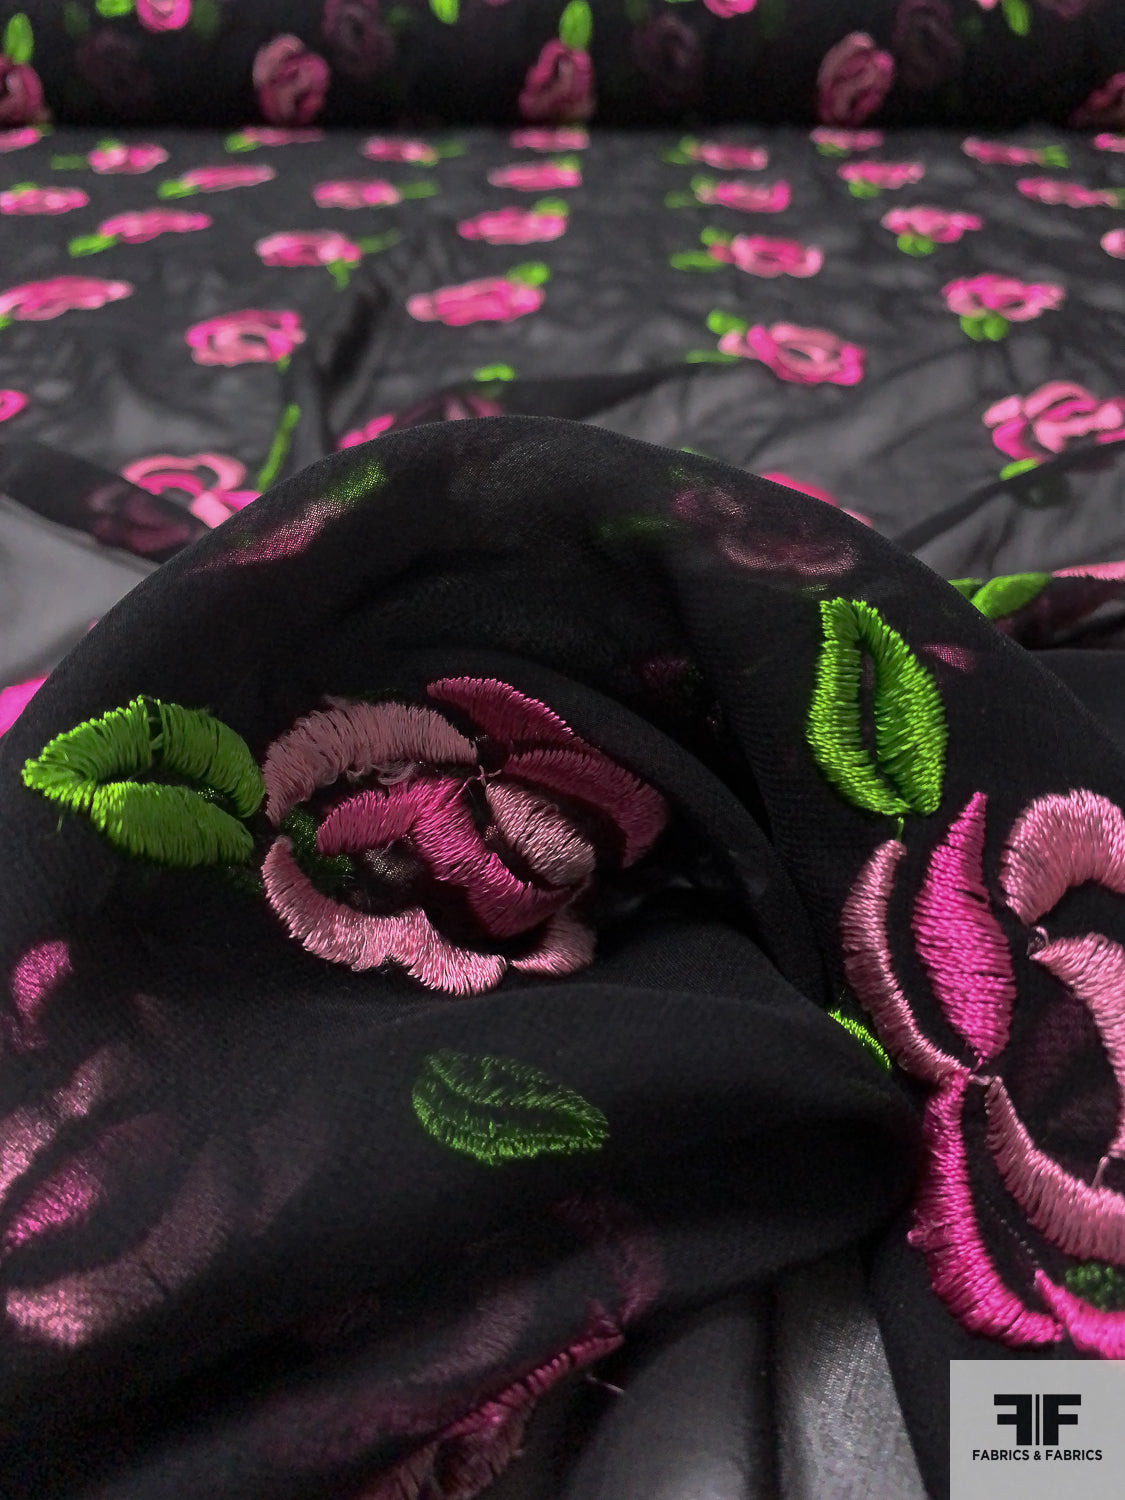 Floral Embroidered Silk Chiffon - Pink/Green/Black